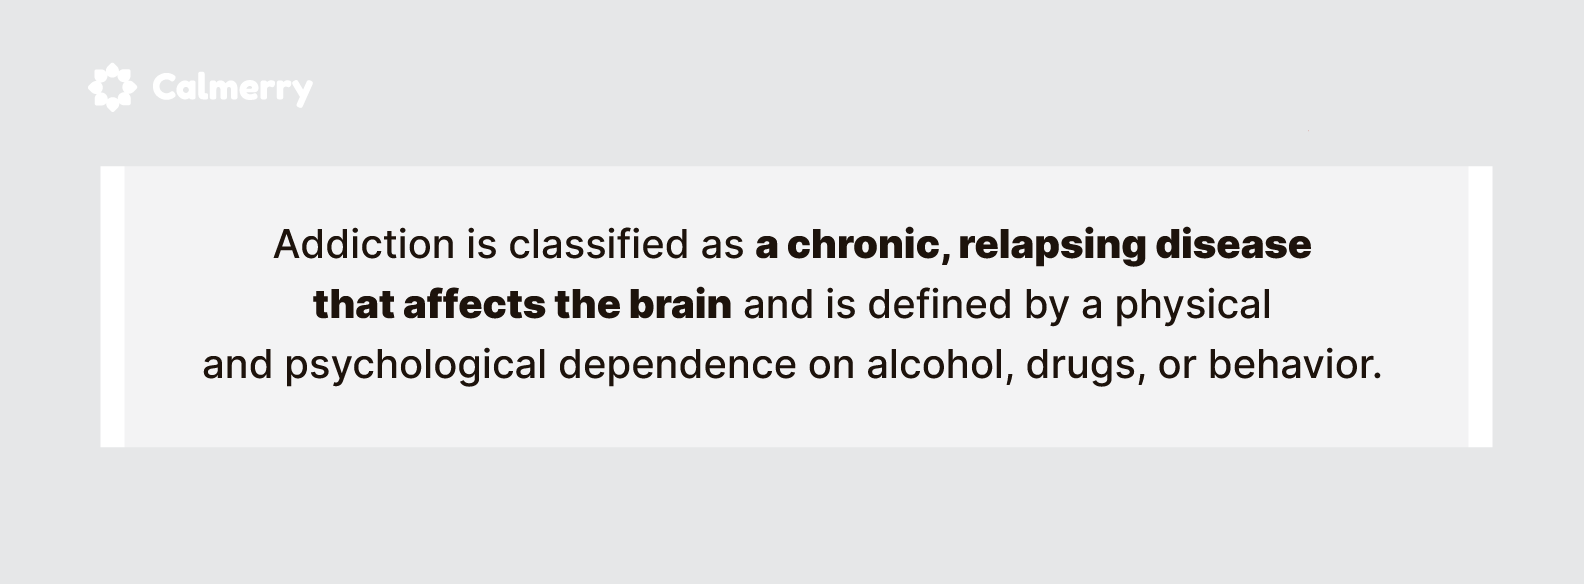 Addiction is classified as a chronic, relapsing disease that affects the brain